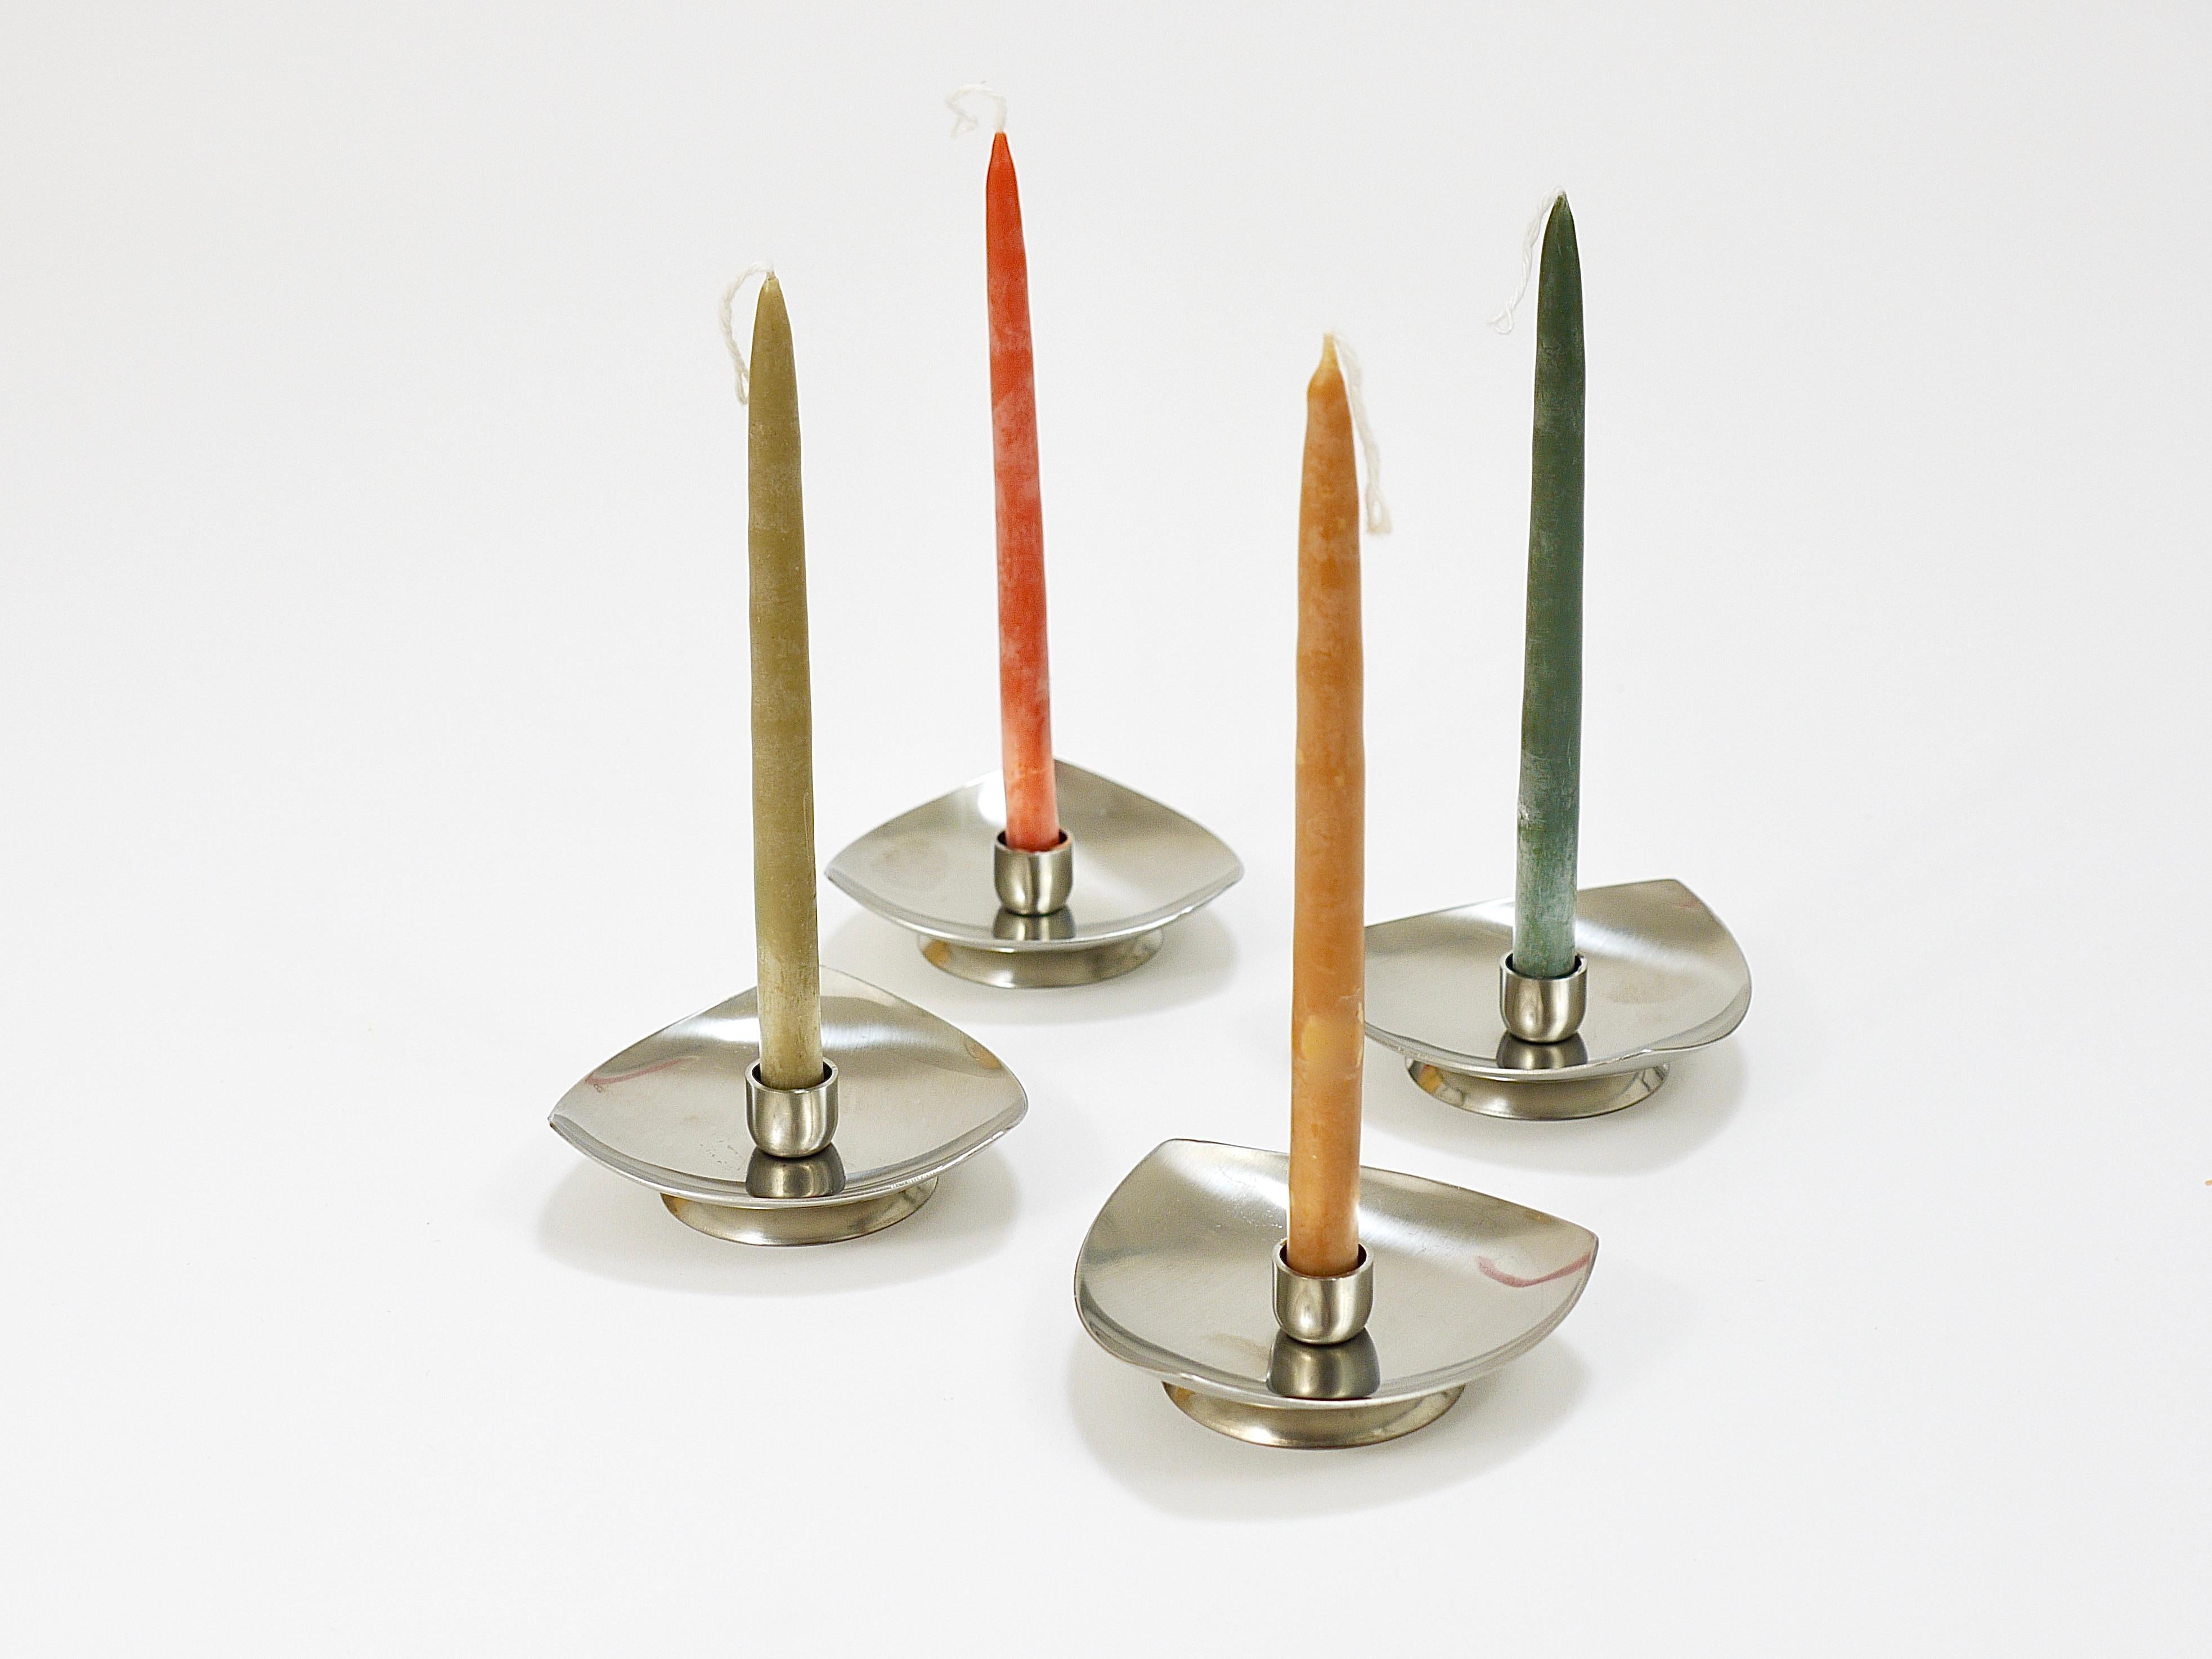 Danish Up to 8 Arne Jacobsen Triangular Candle Holders by Stelton Denmark, 1960s For Sale